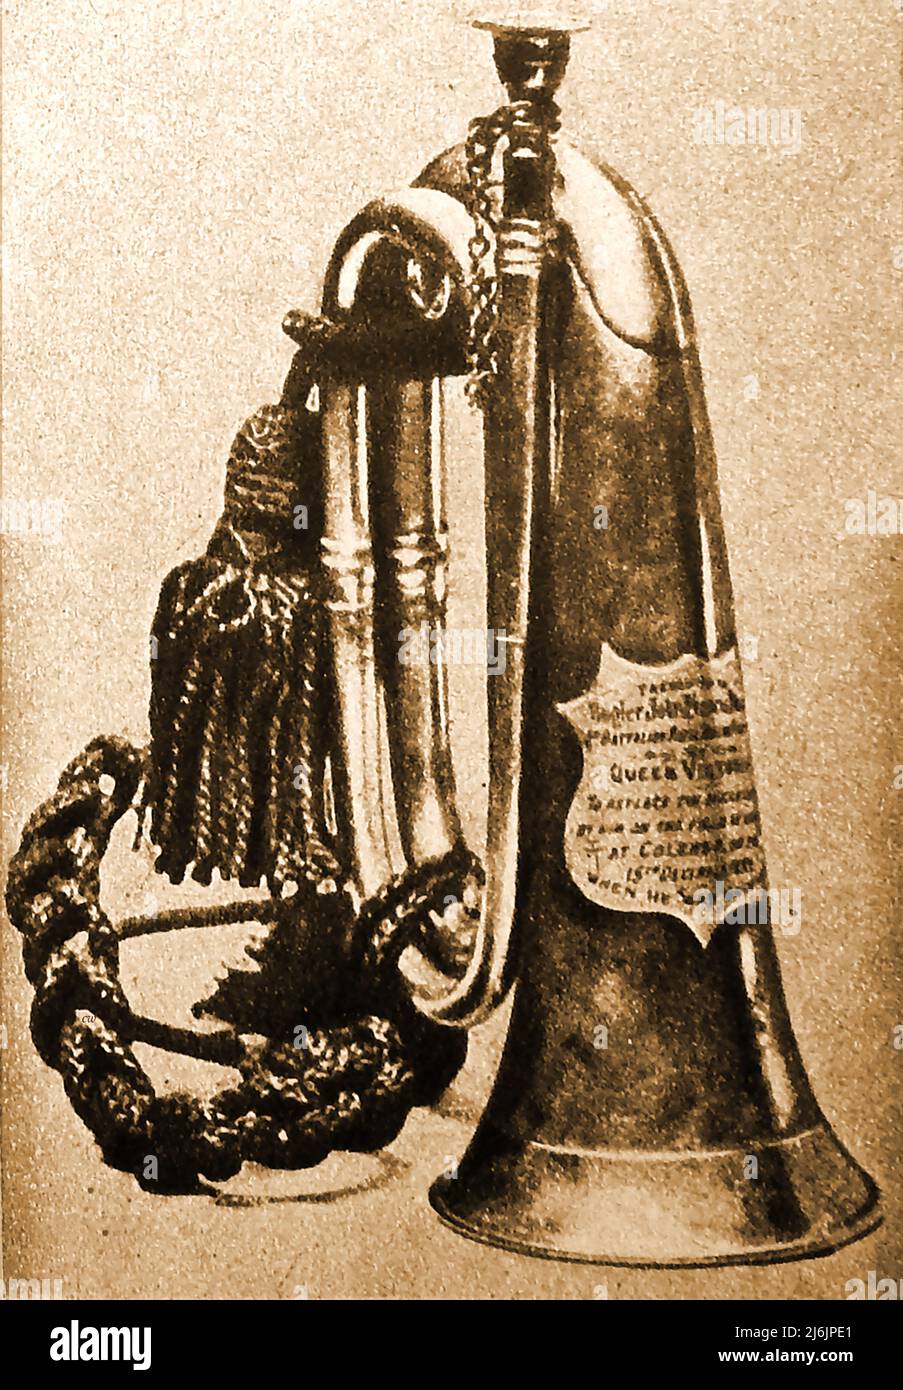 Boer War - A 1900 photograph of  the trumpet presented to the  'Hero of Colenso' , Bugler Dunn (John Francis Dunne) 1898-1950,  of the Royal Dublin Fusiliers, the regiment he joined as a boy bugler when aged 14. Wounded at Colenso, South Africa ( 15th Dec 1899), he  he lost his bugle but so impressed the British public that he was declared a hero .Queen Victoria  personally presented him with this  silver inscribed replacement  bugle at Osborne House. Stock Photo